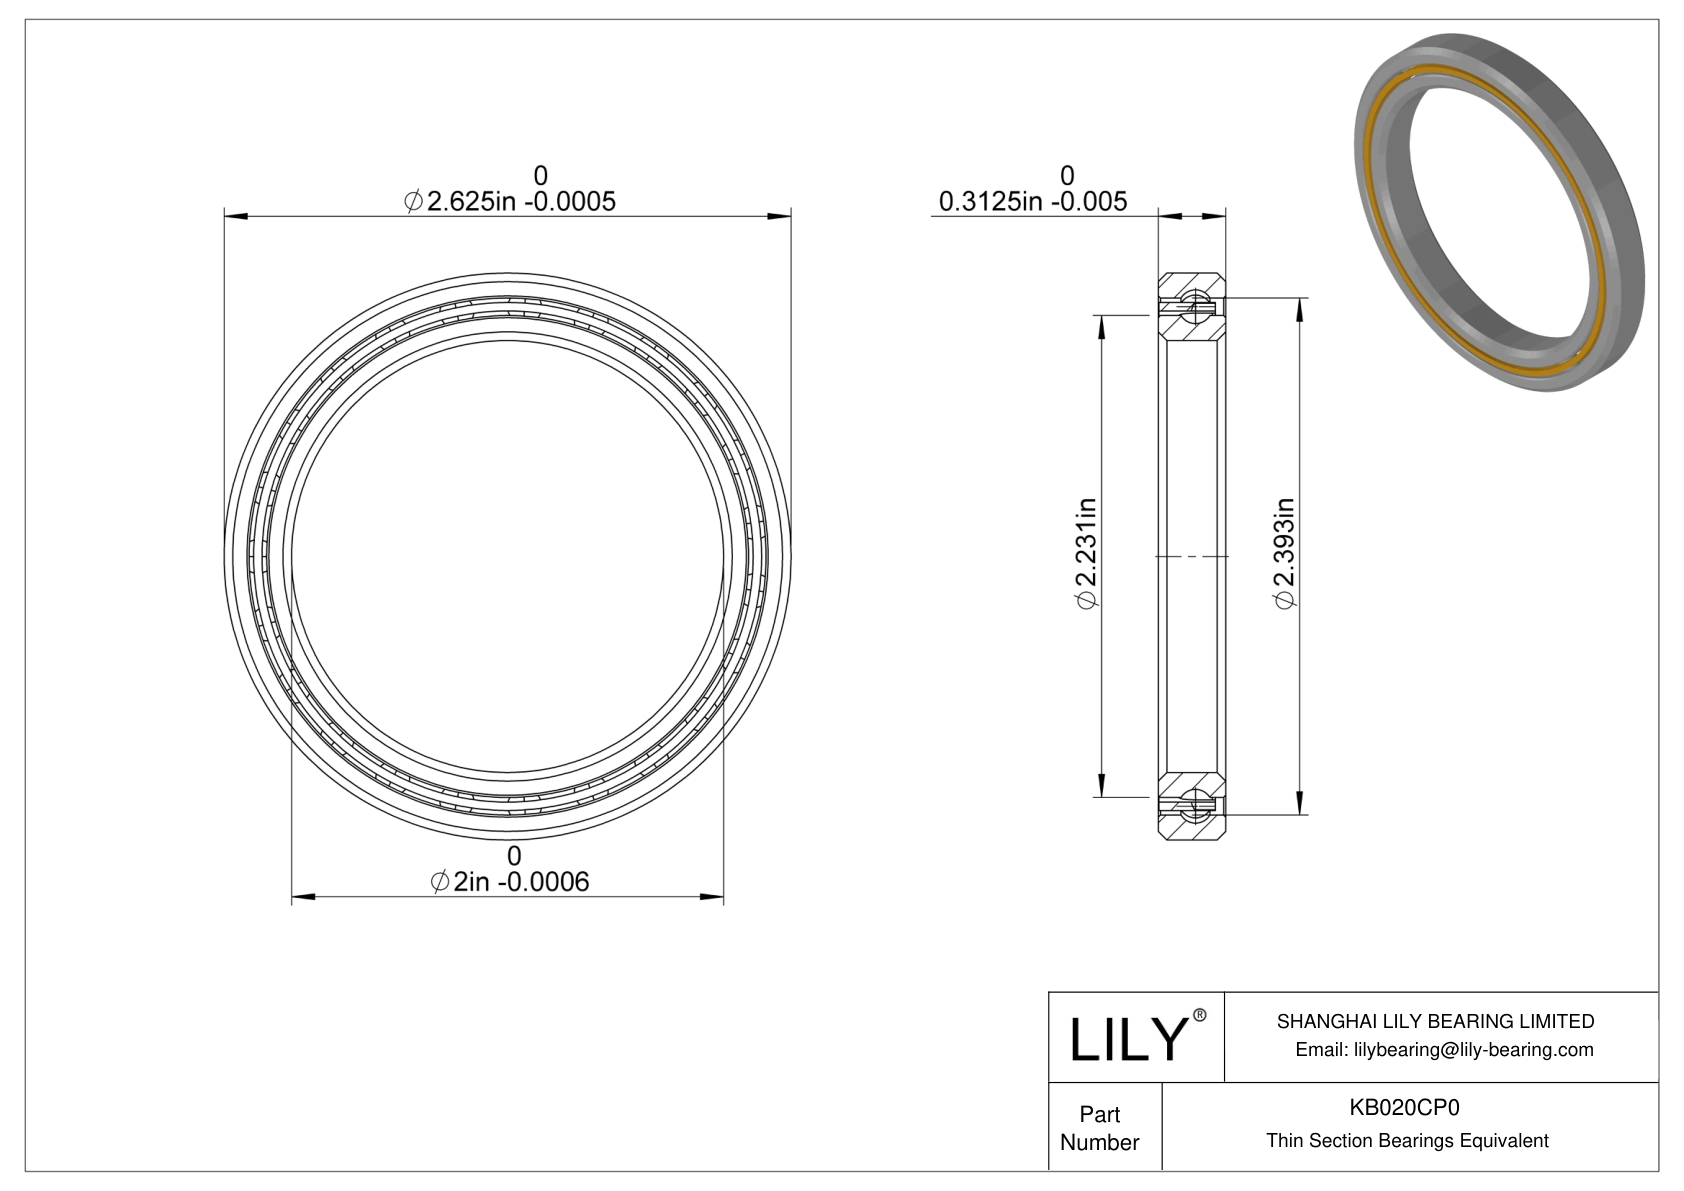 KB020CP0 Constant Section (CS) Bearings cad drawing